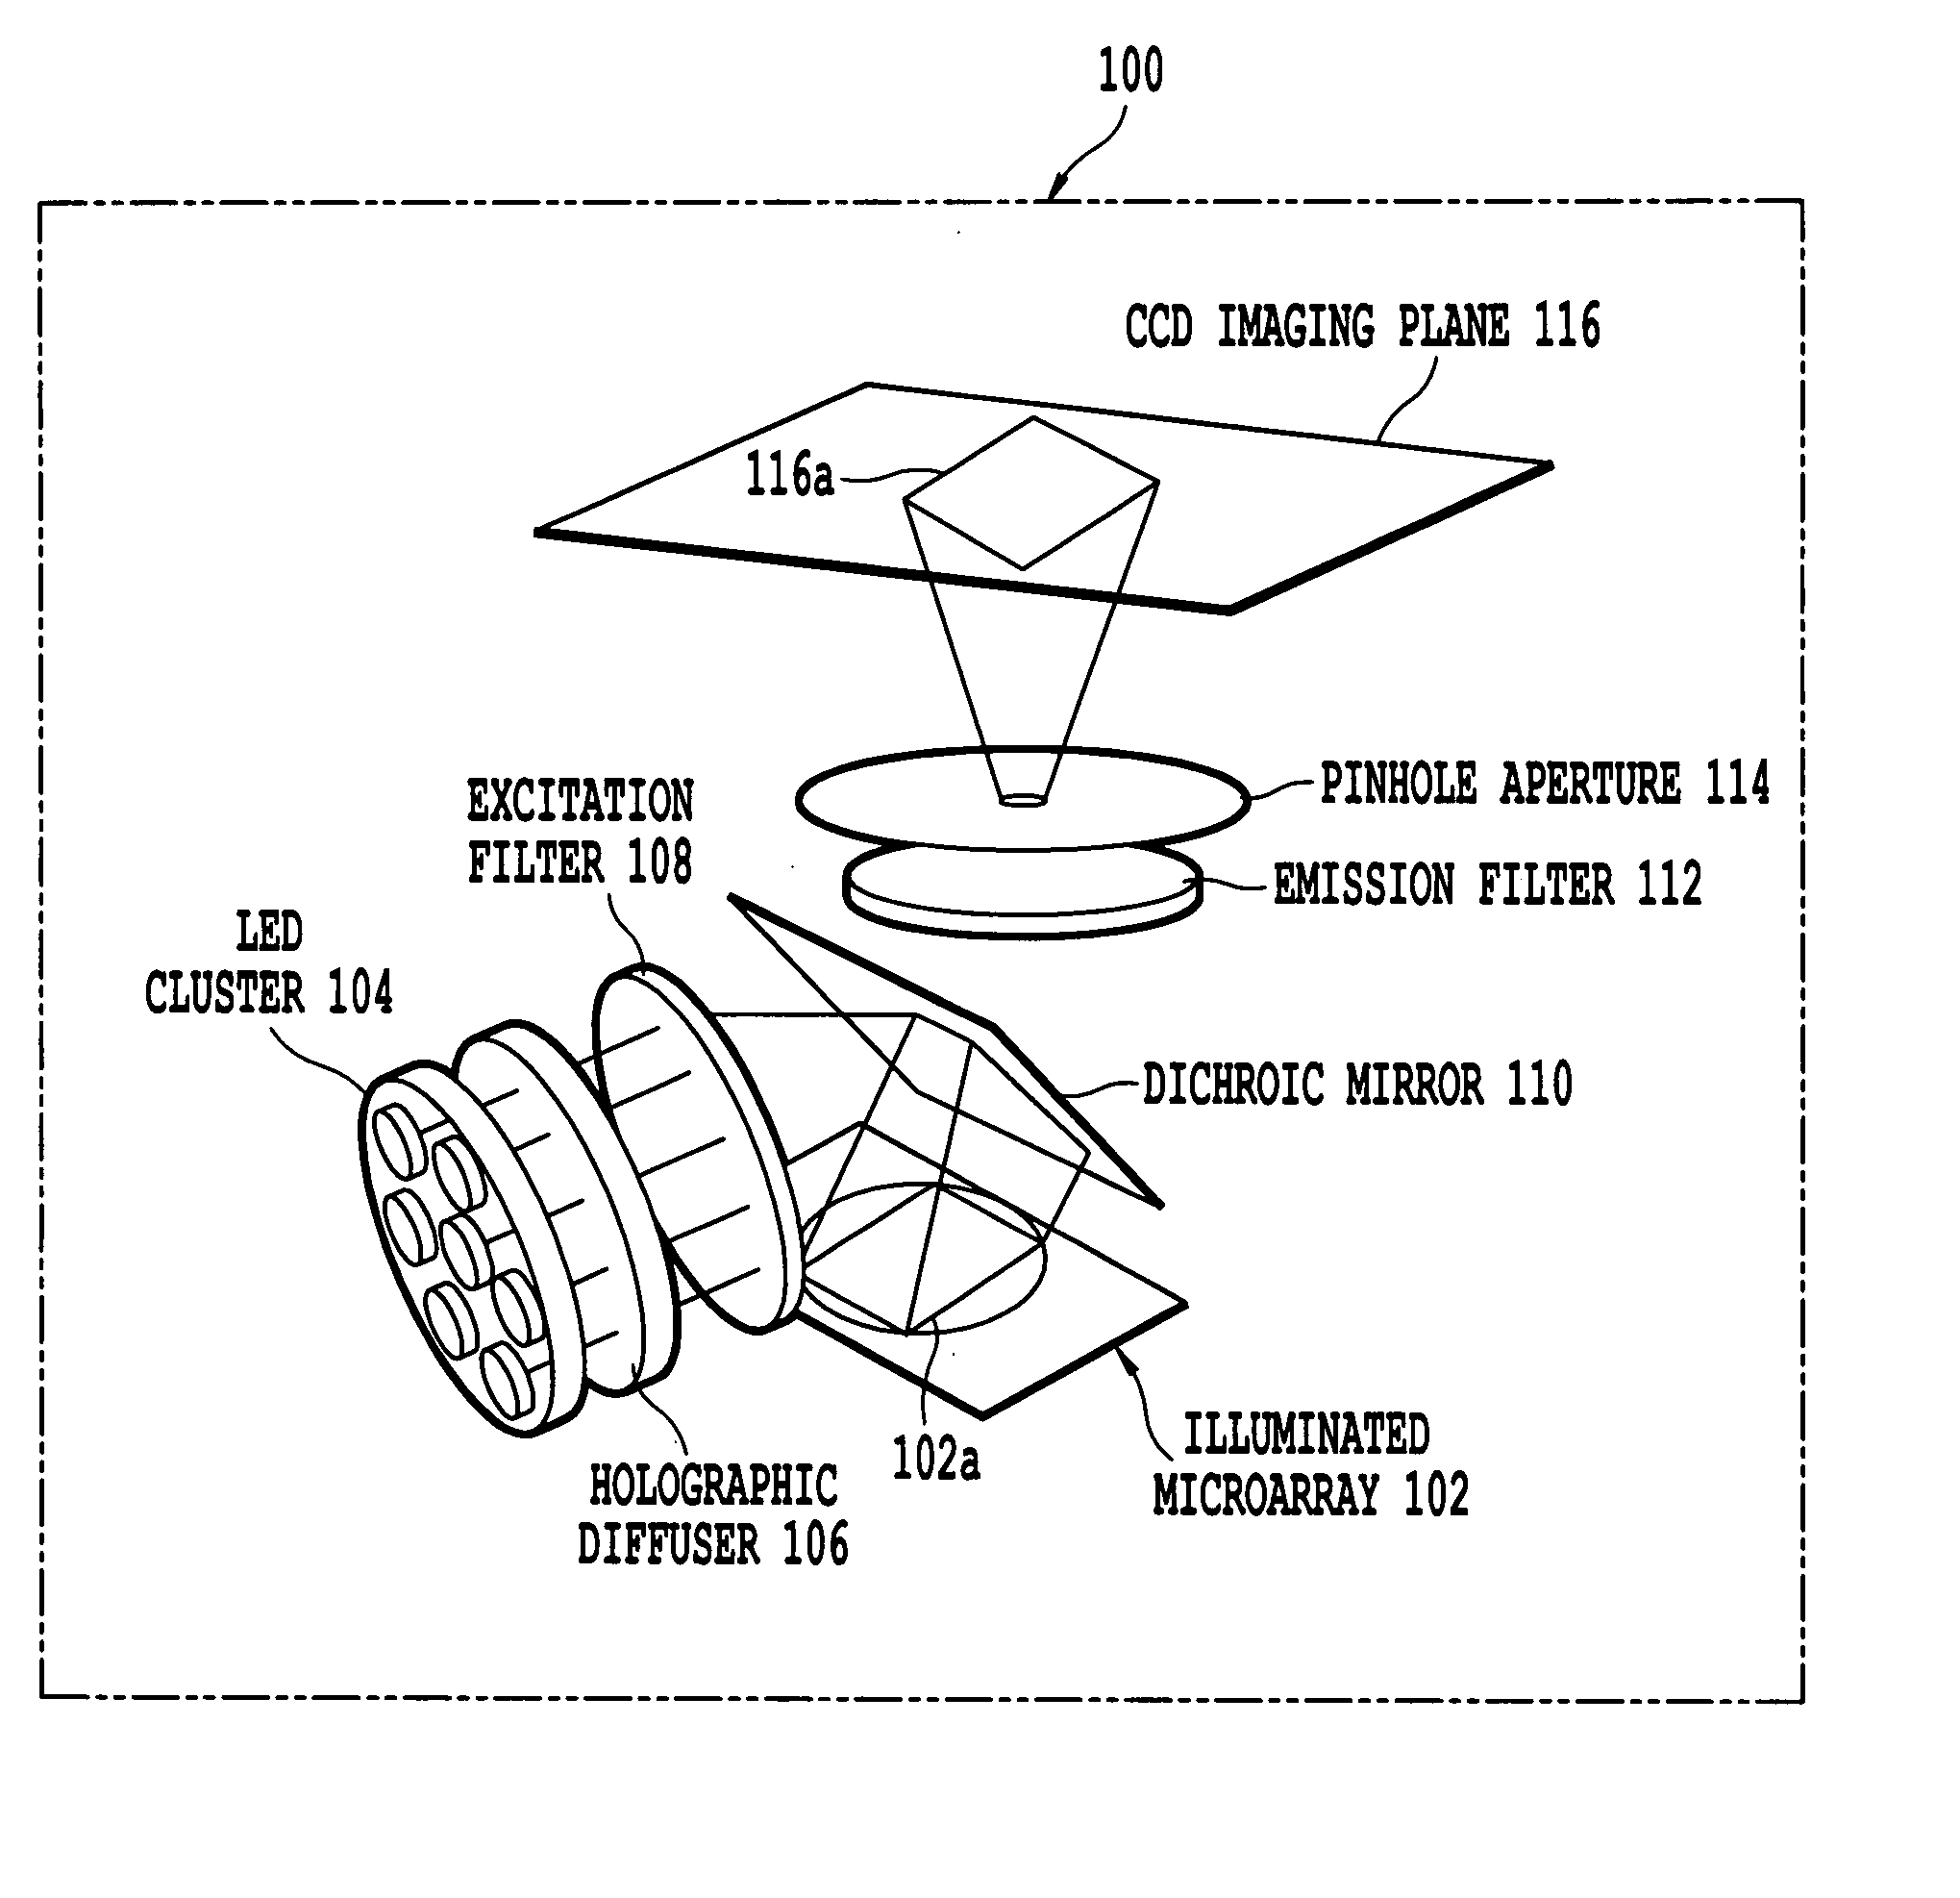 Microarray imaging system and associated methodology